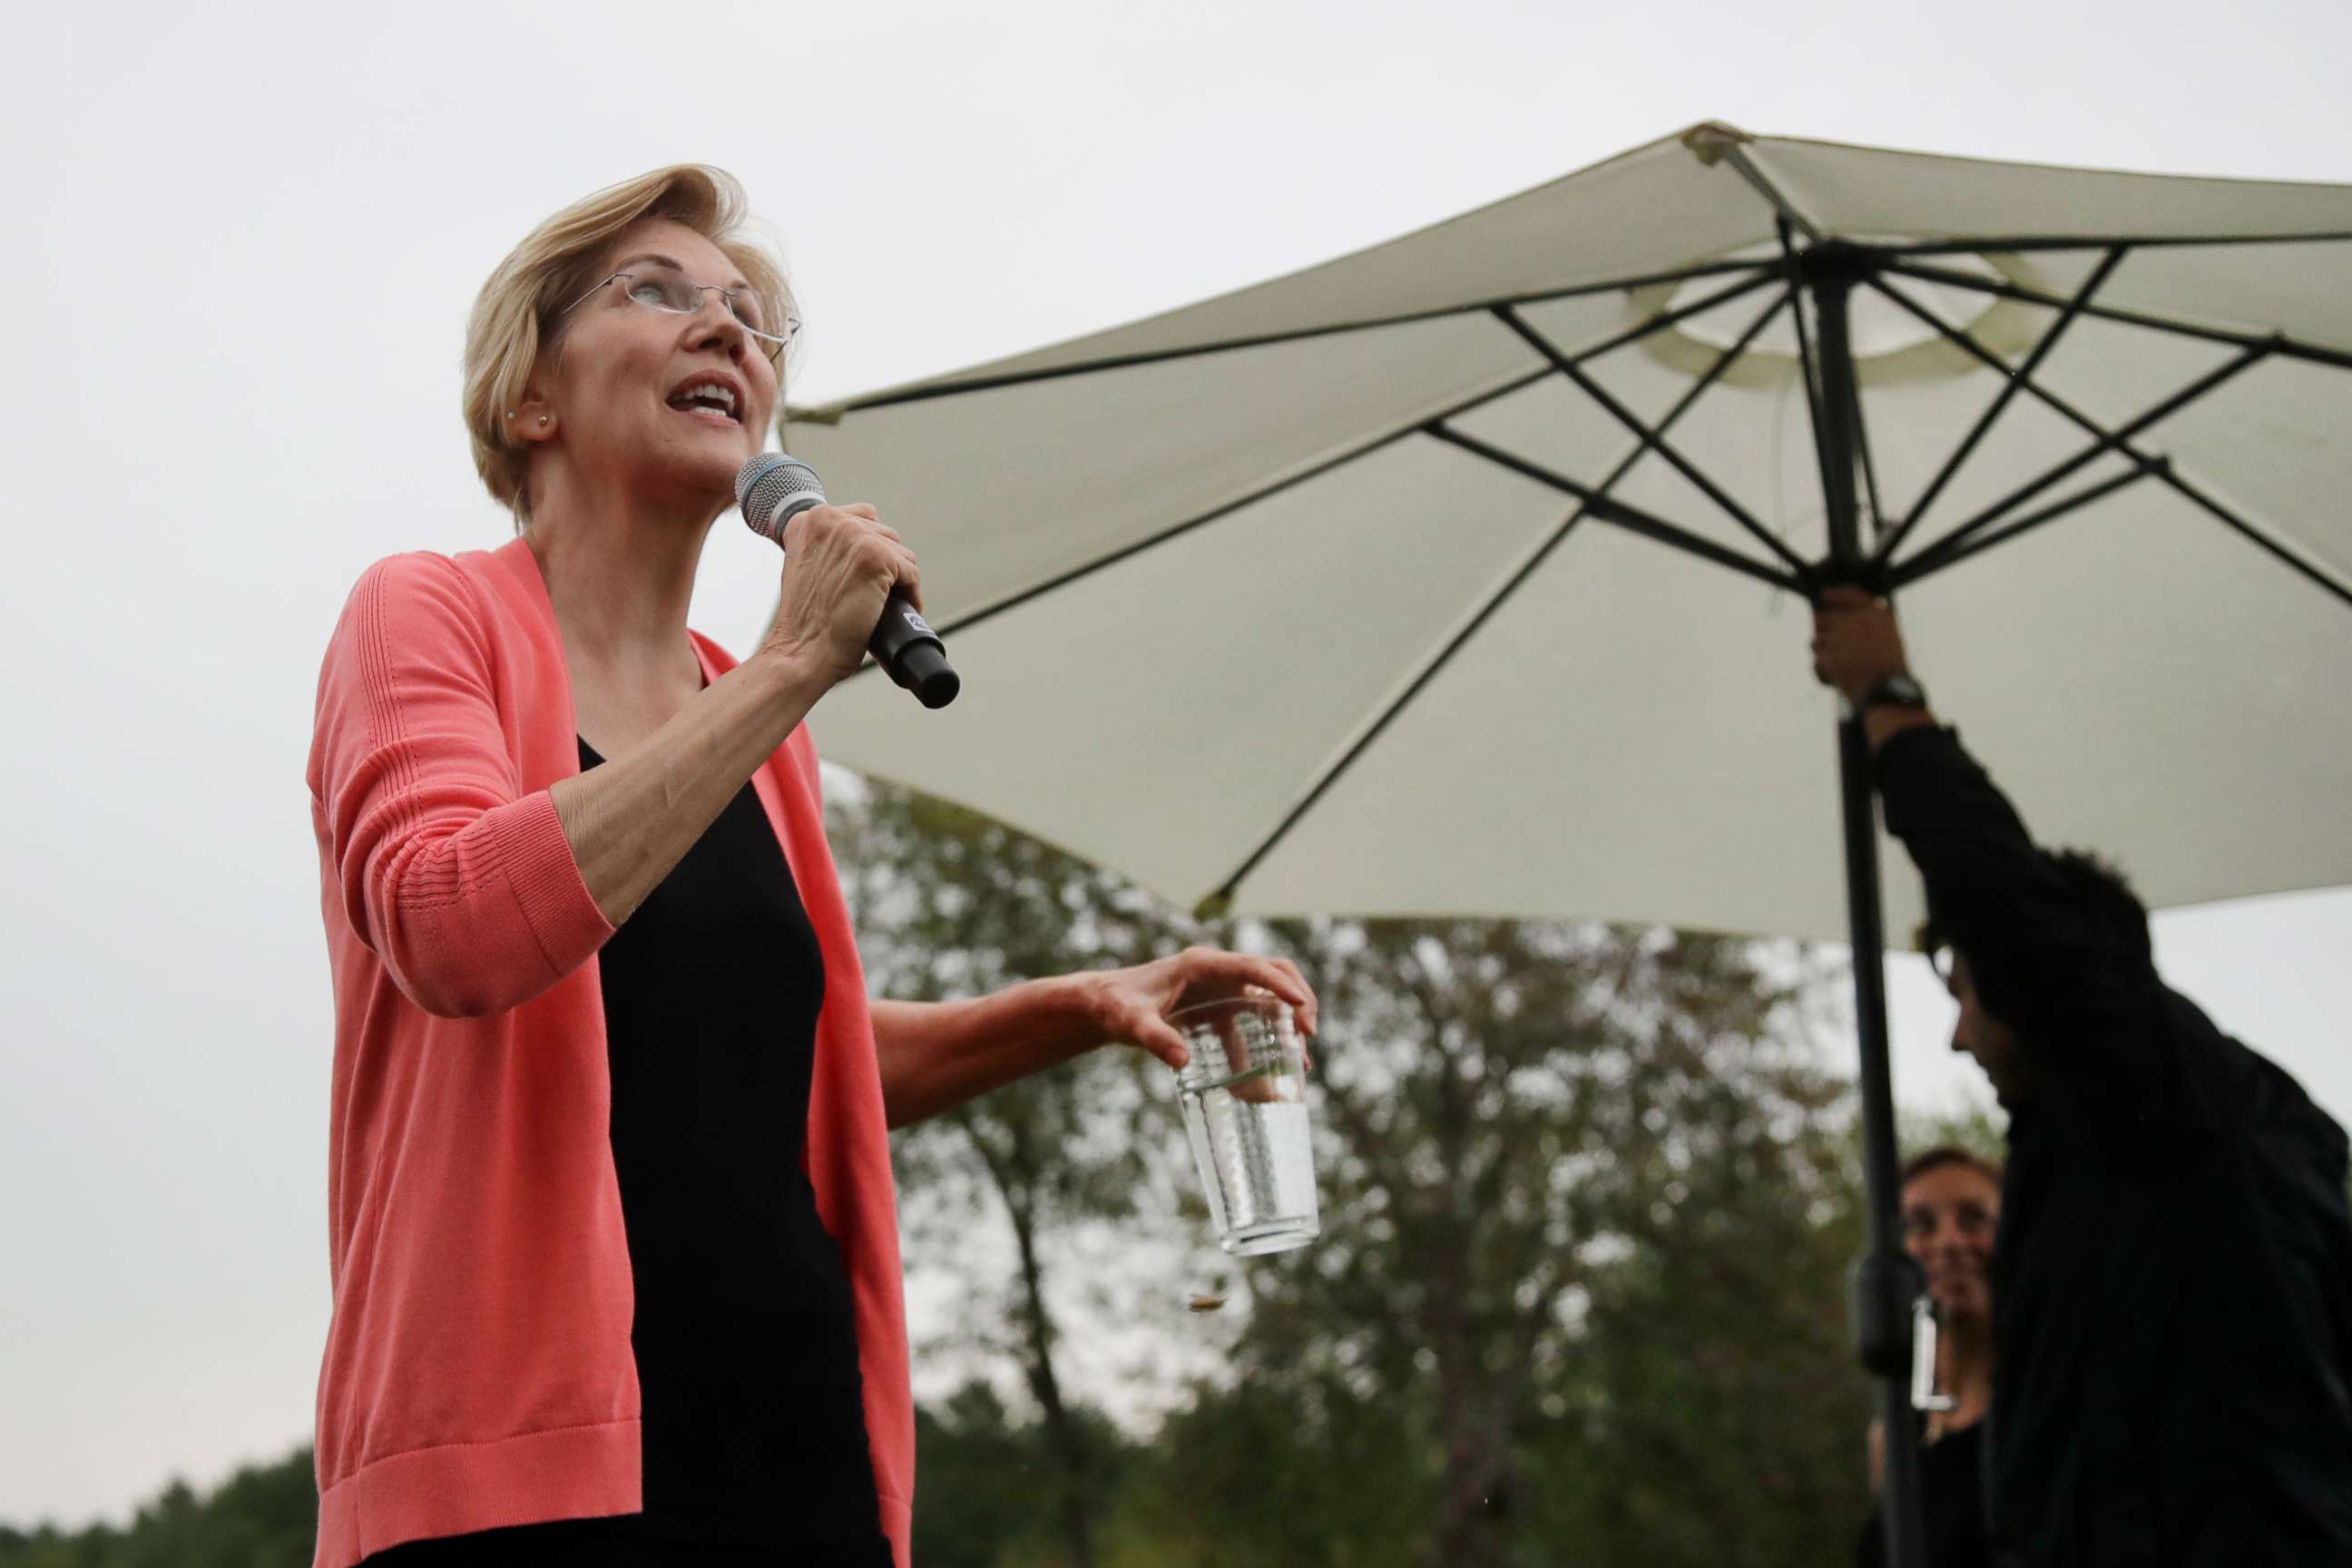 PHOTO: Democratic presidential candidate Sen. Elizabeth Warren, D-Mass., looks up at the rain as an umbrella is set up during a campaign event, Monday, Sept. 2, 2019, in Hampton Falls, N.H.